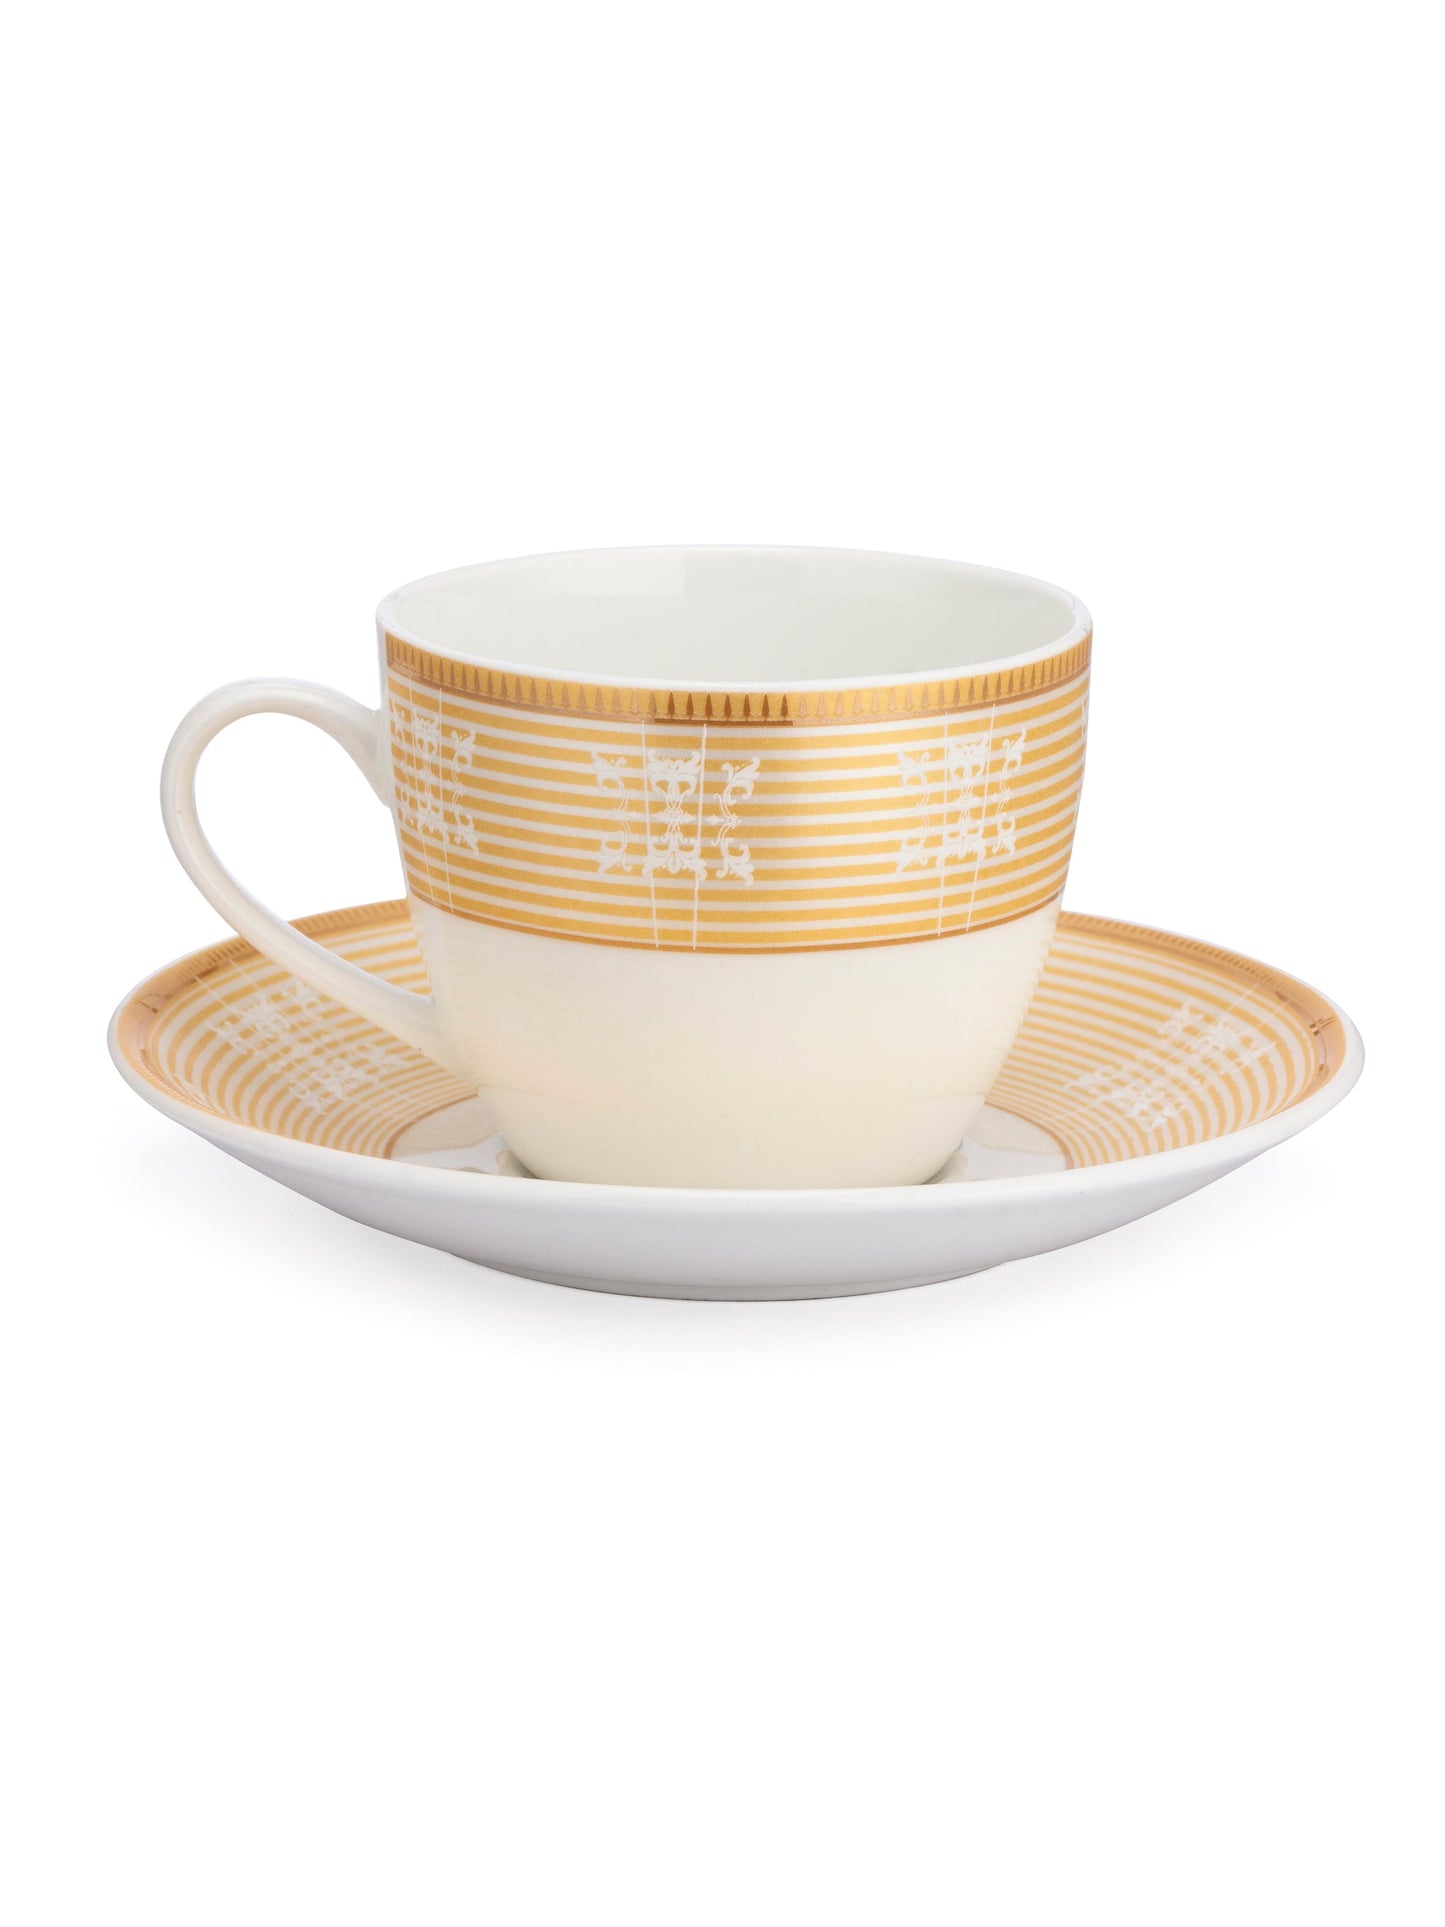 Cream Super Cup & Saucer, 210ml, Set of 12 (6 Cups + 6 Saucers) (S304)